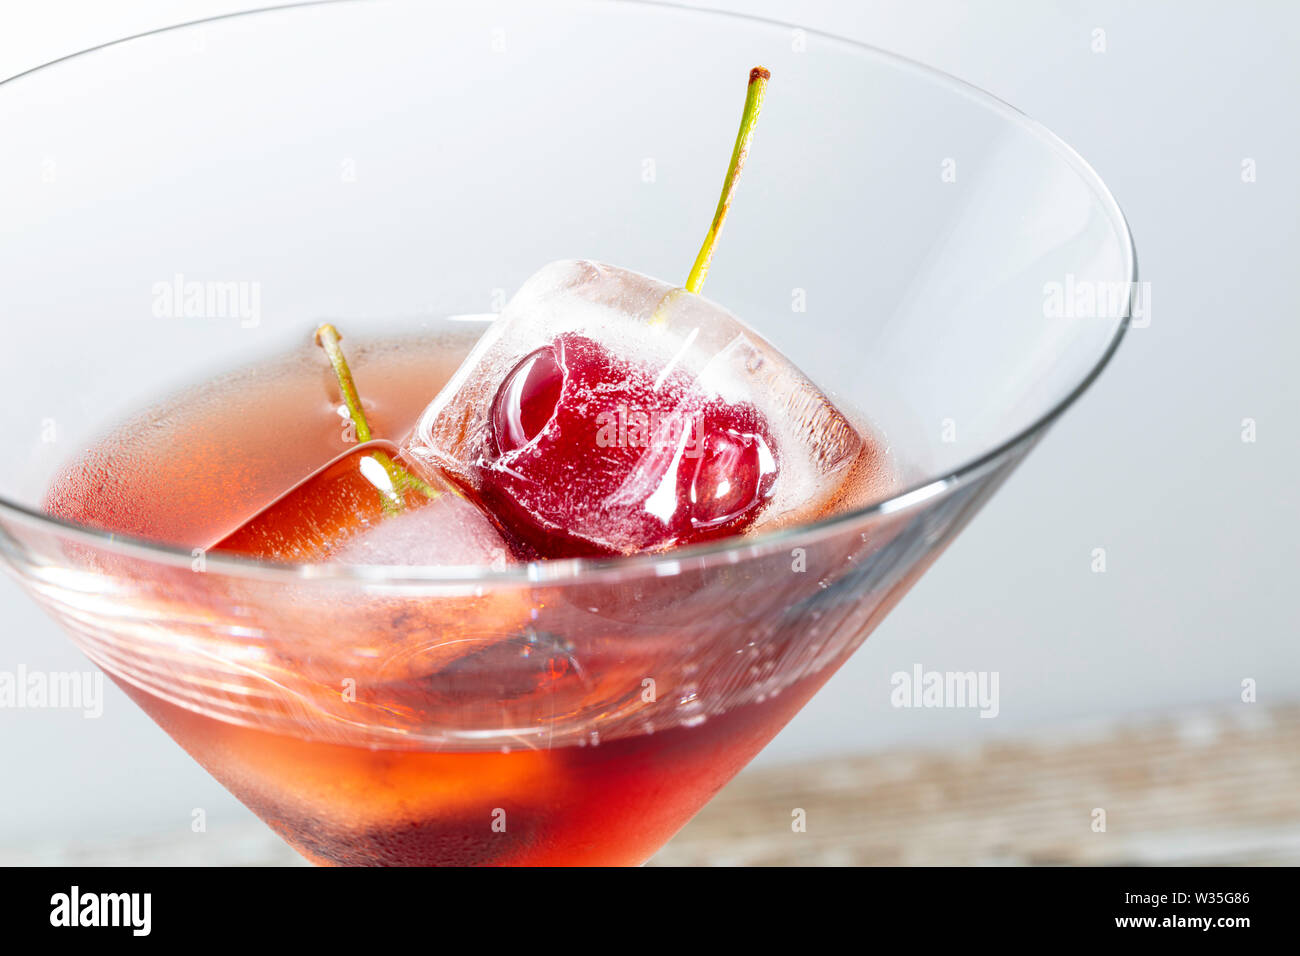 ice cubes with cherries inside into a red cocktail, white background with free space for text Stock Photo